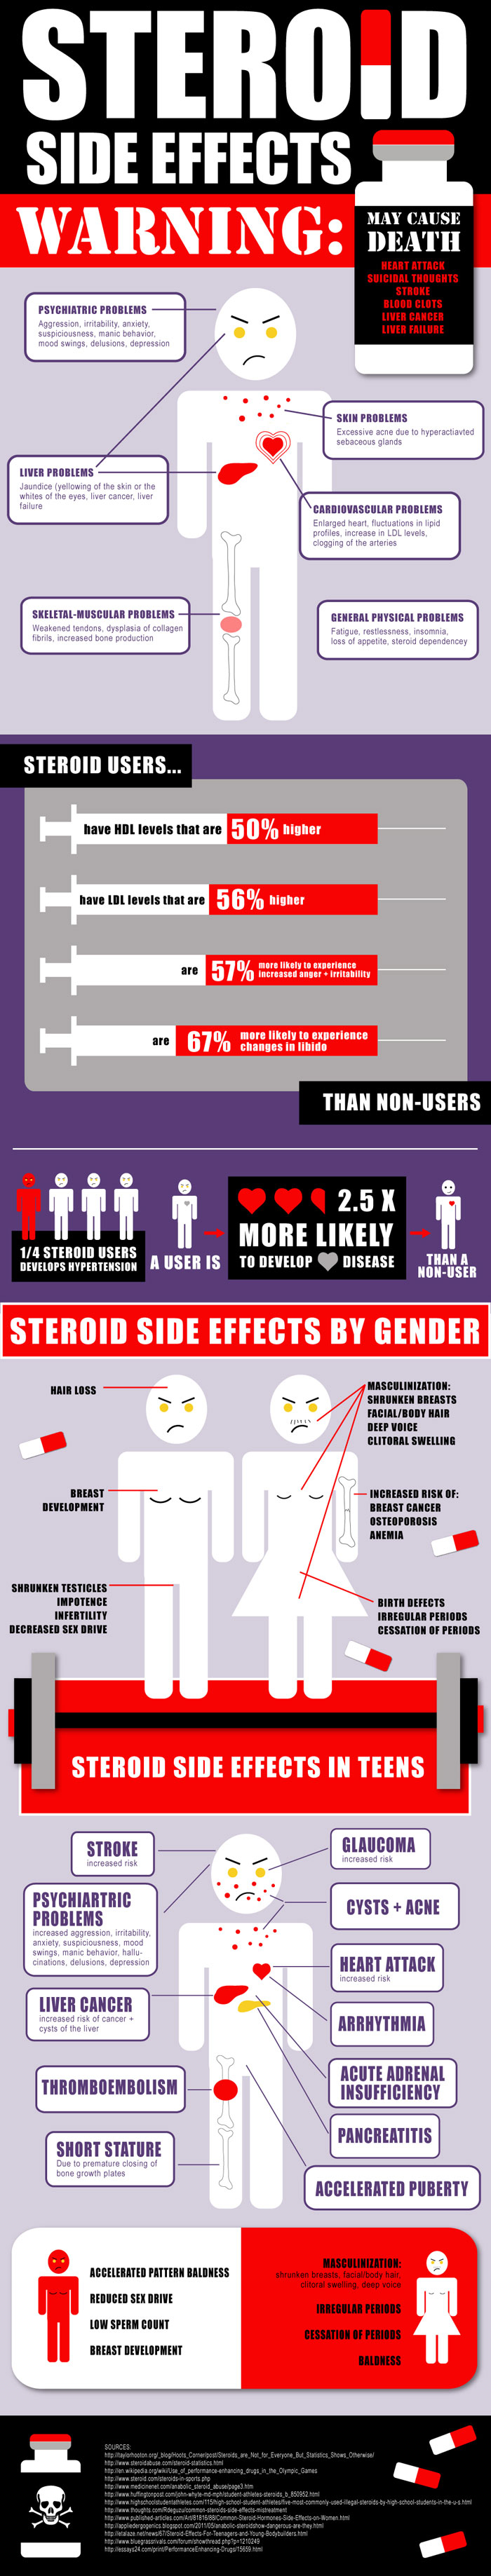 Steroids Side Effects